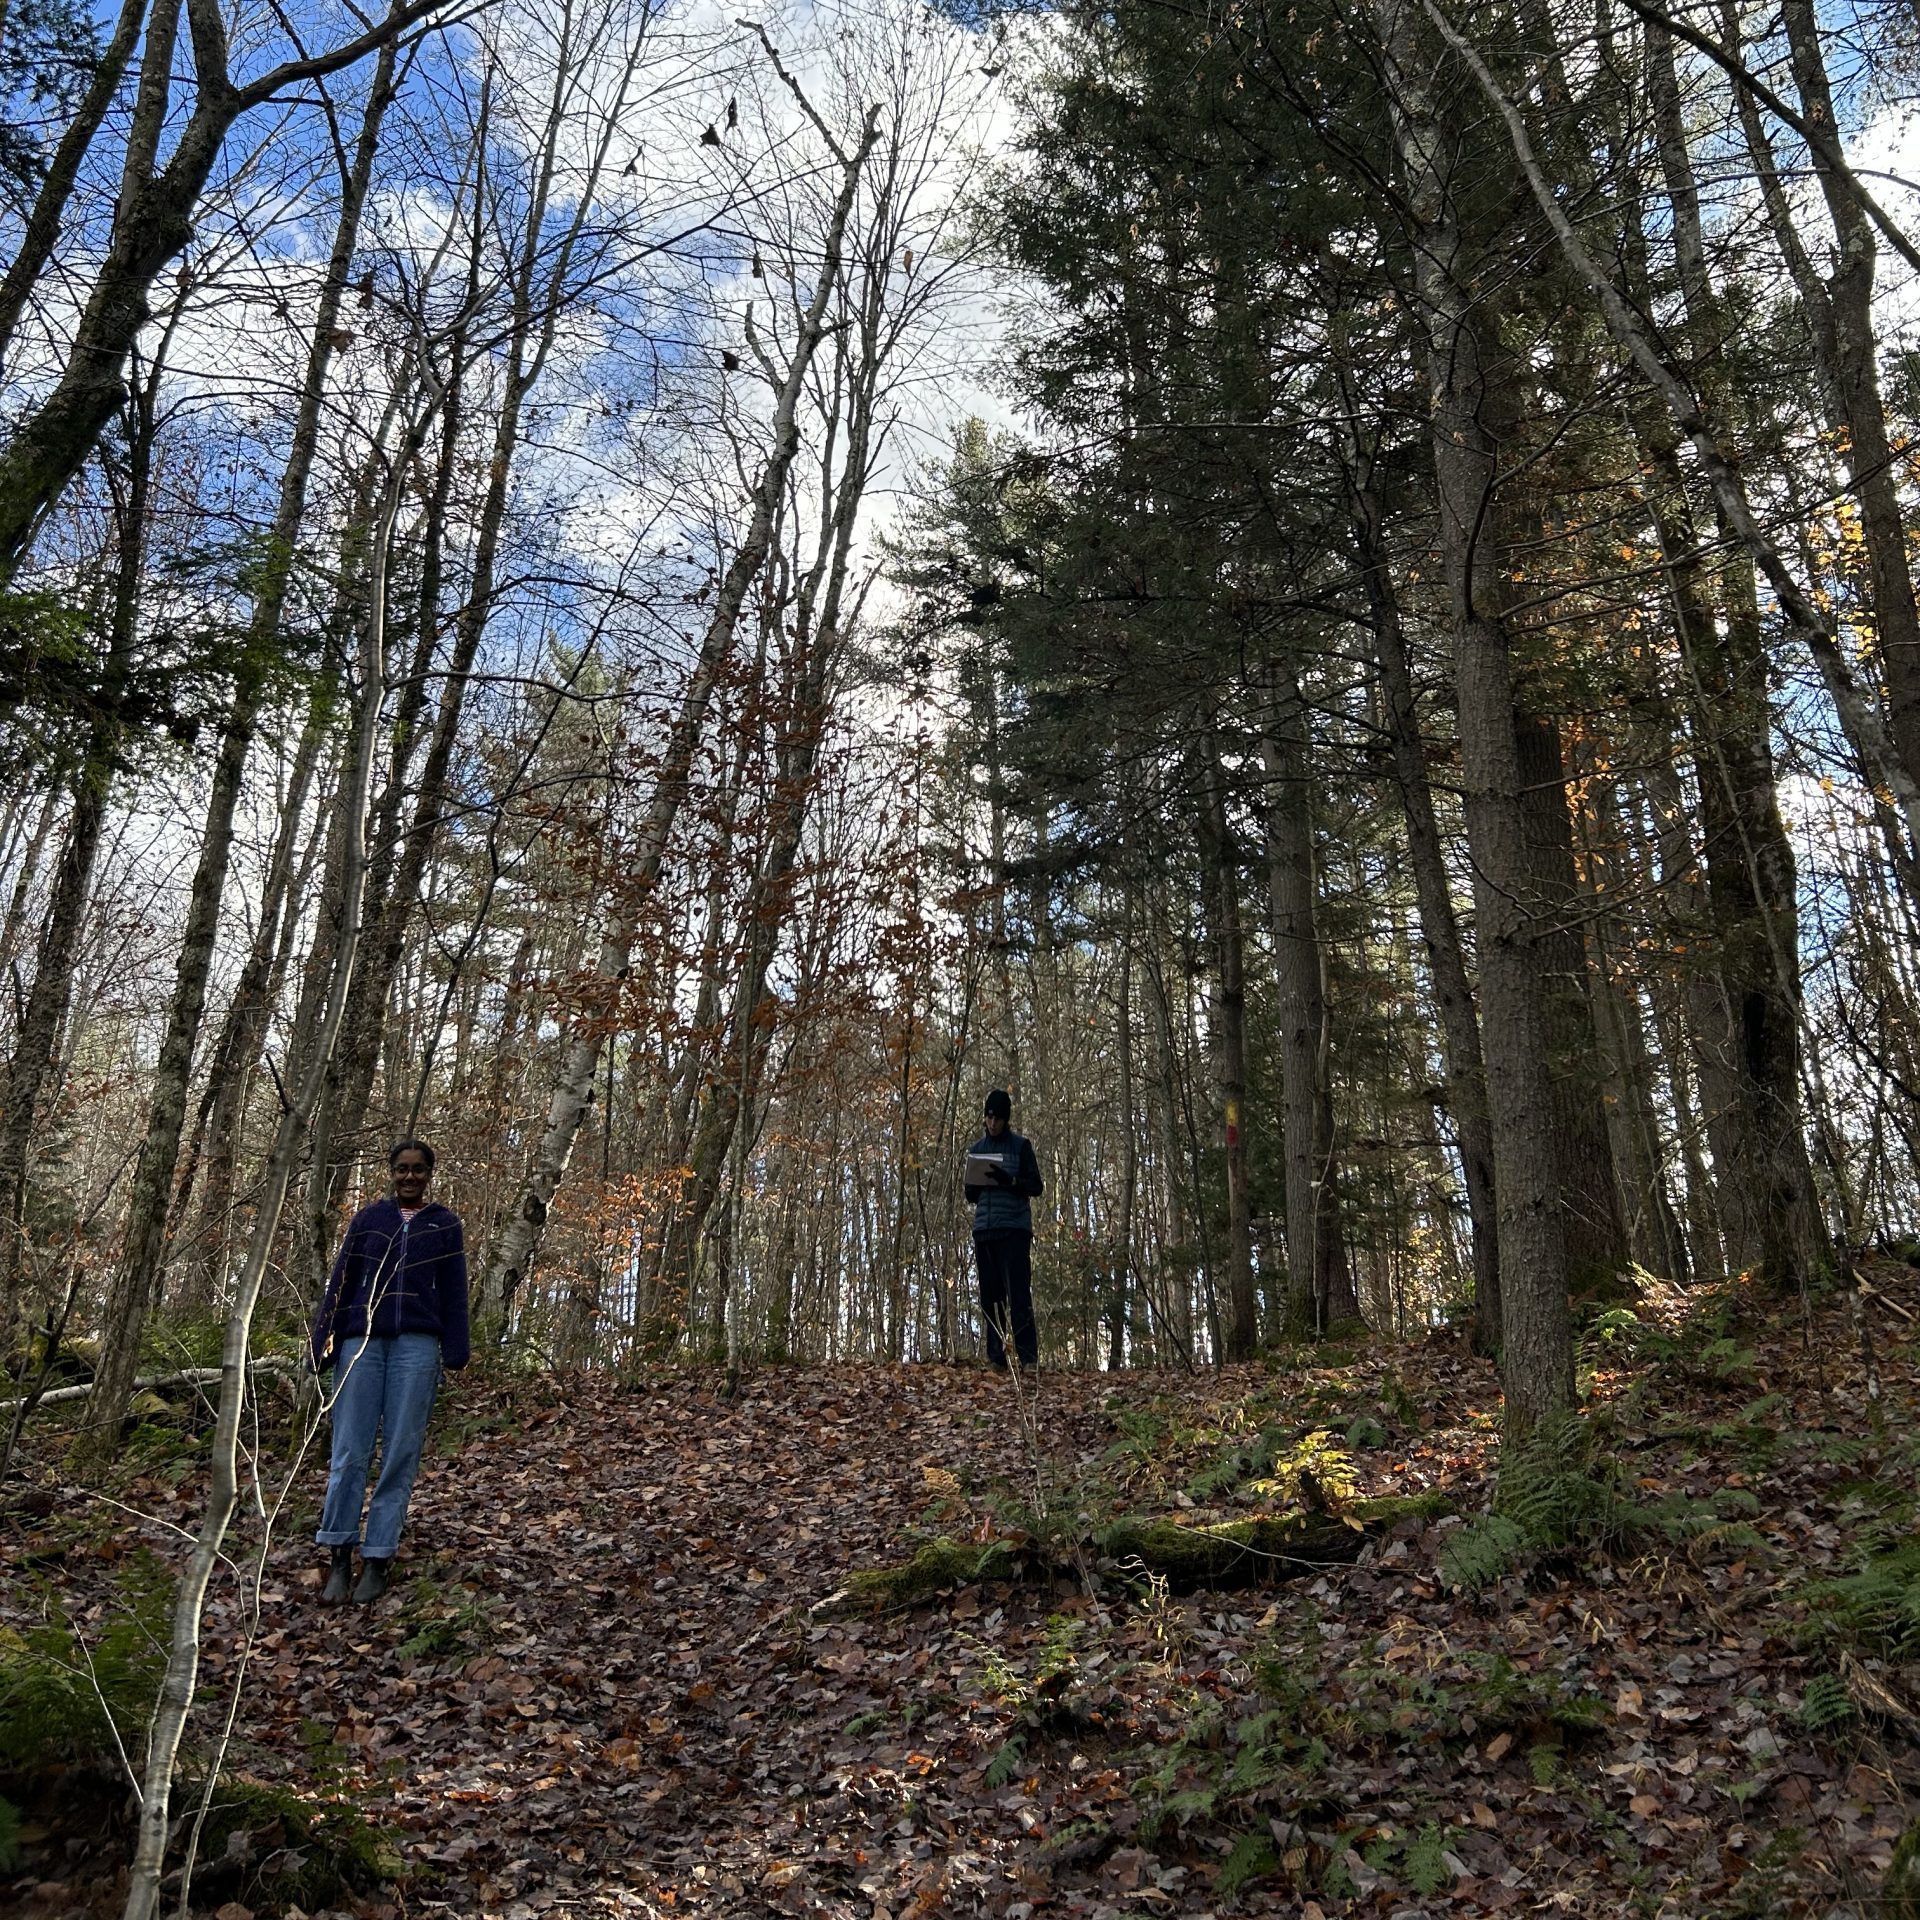 These adventures get participants outside to explore natural areas in Addison County! Each adventure leads you through a trail with a series of directions and clues containing local ecological knowledge. Participants are supported to develop a keen eye for features of the environment.